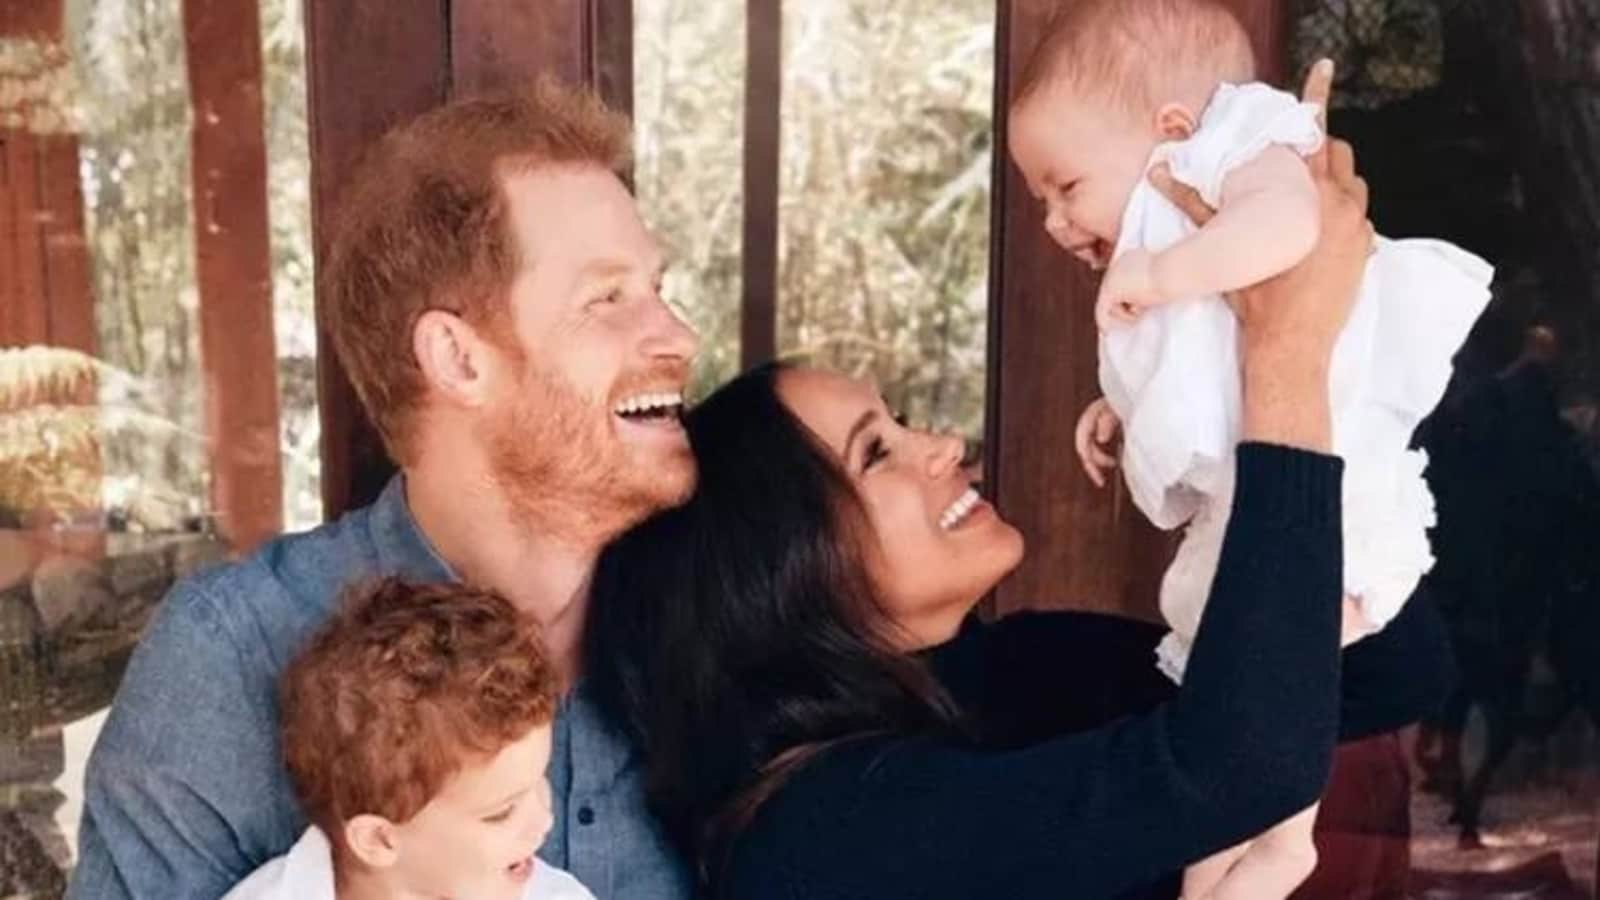 Are Archie and Lilibet missing out on Royal Easter tradition? Prince Harry thinks so as 'bridges being burnt'